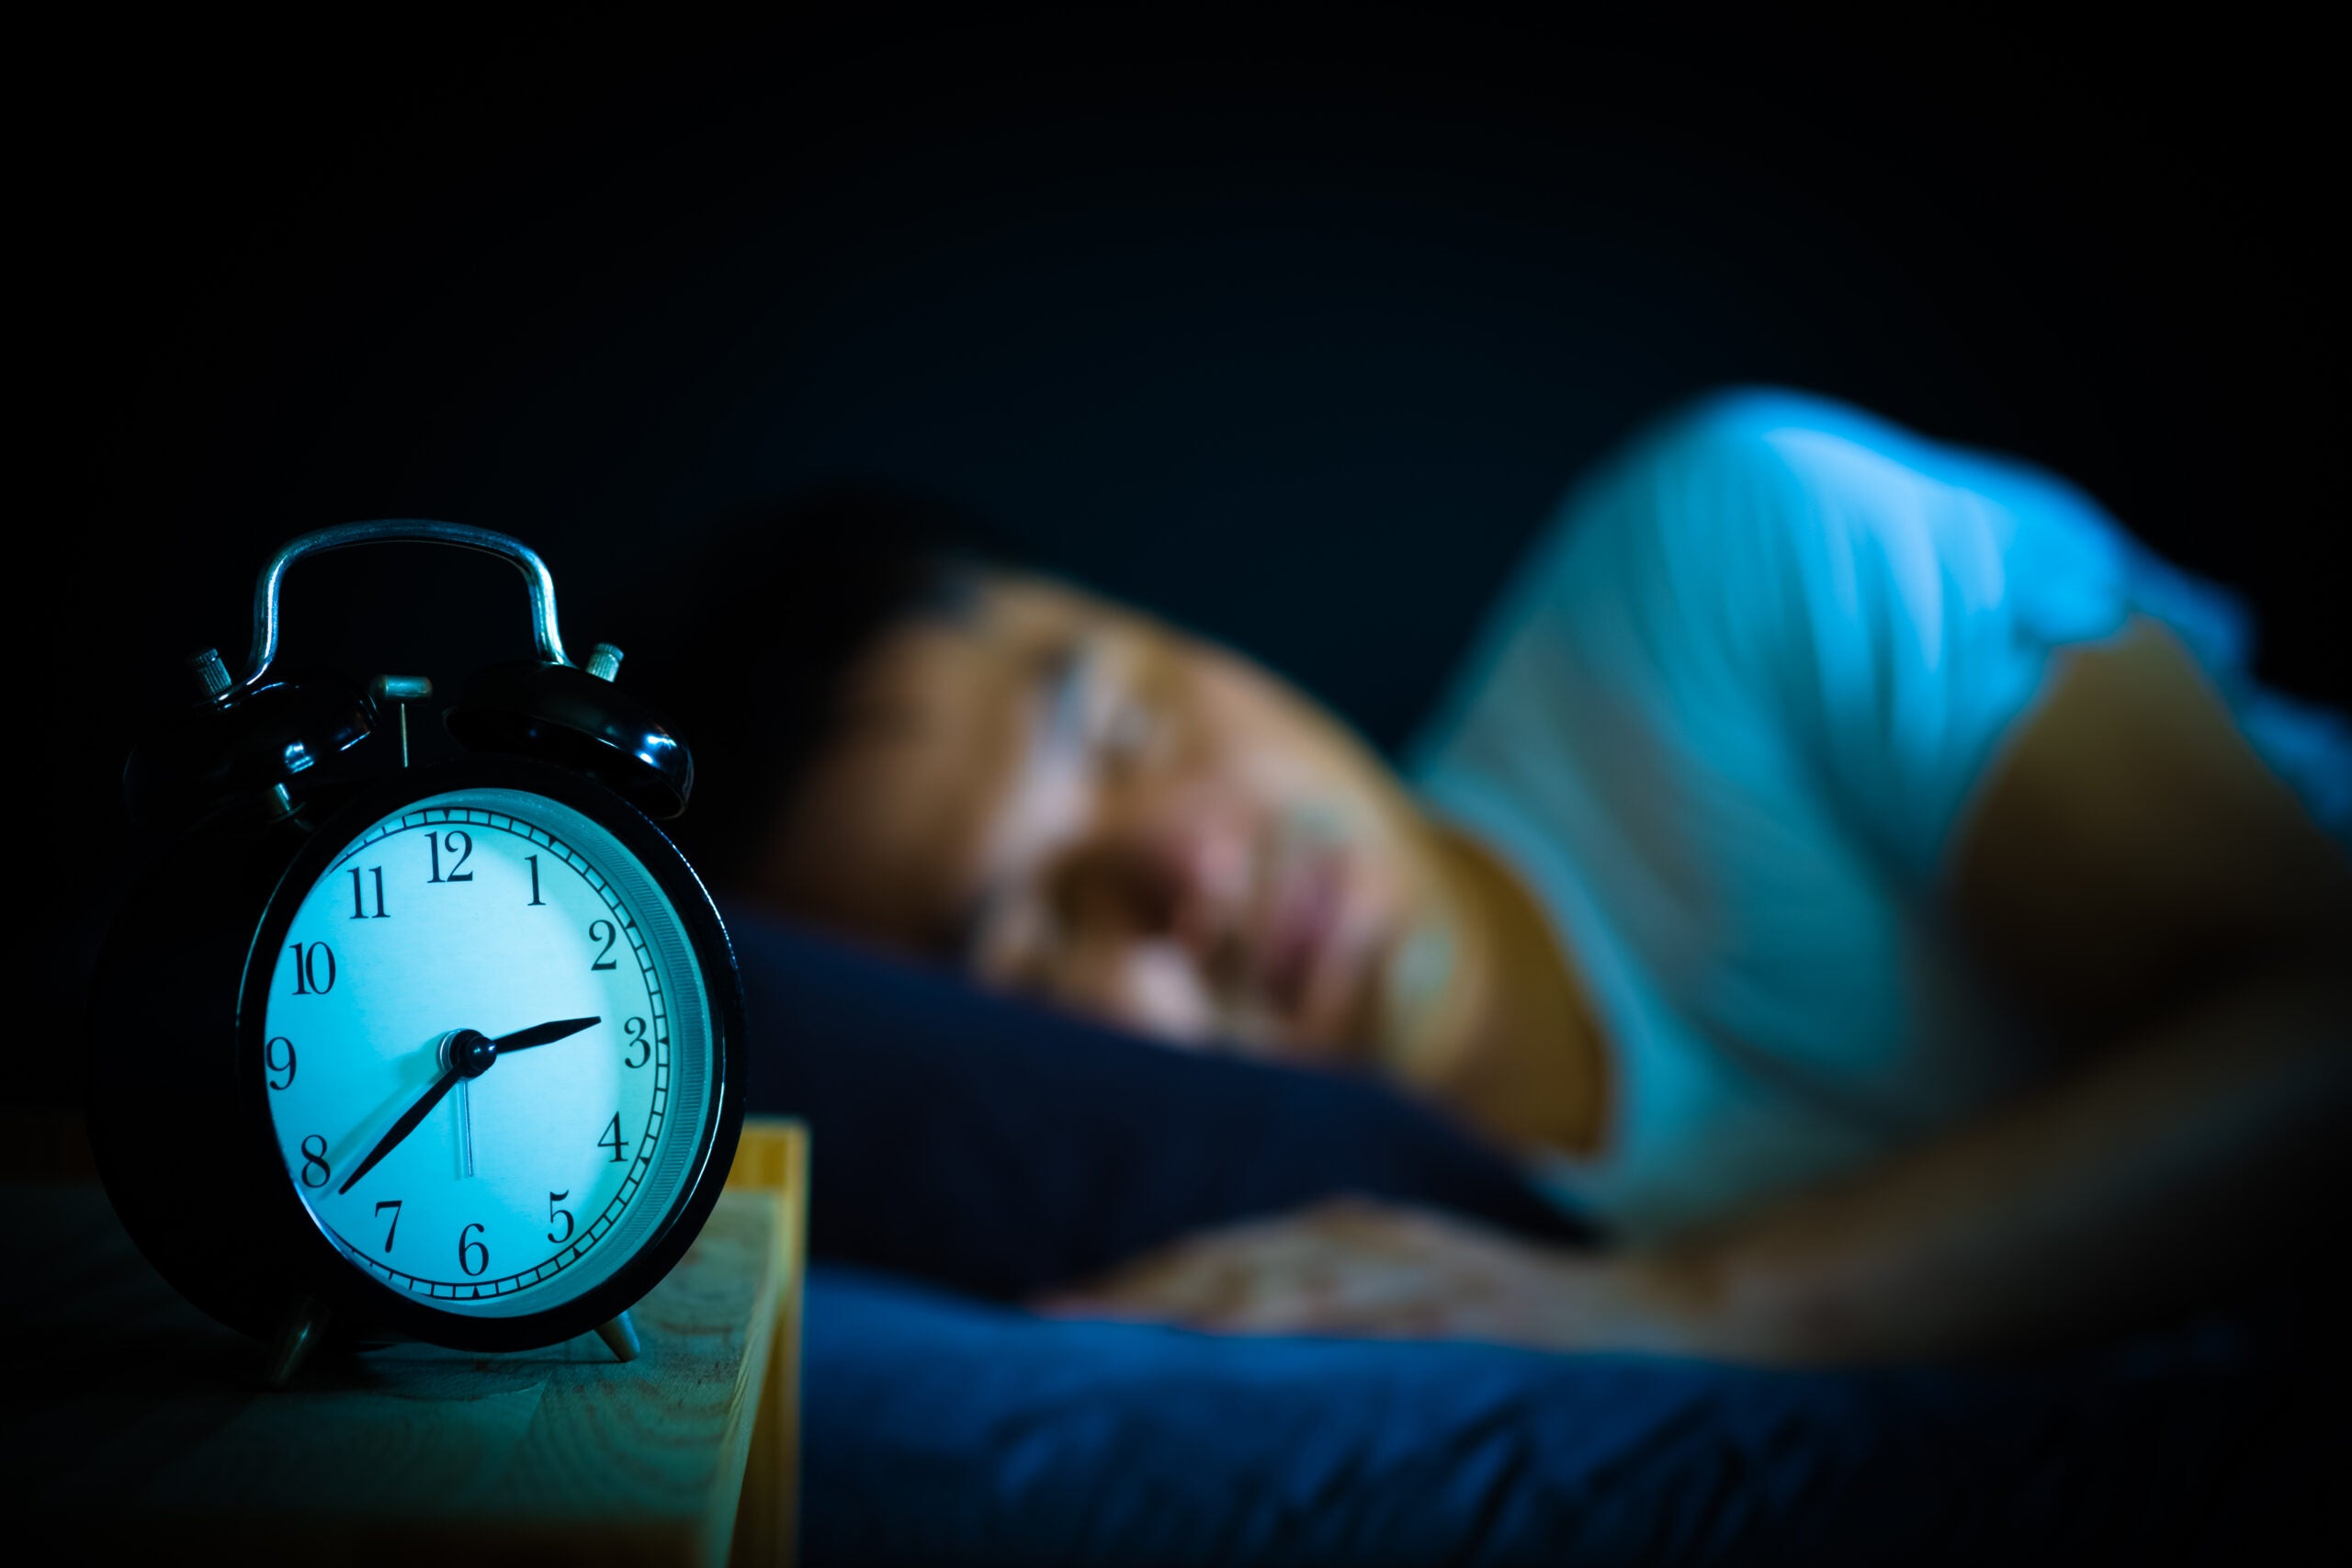 man sleeping in a bed at night with an alarm clock in the foreground showing the time as three am